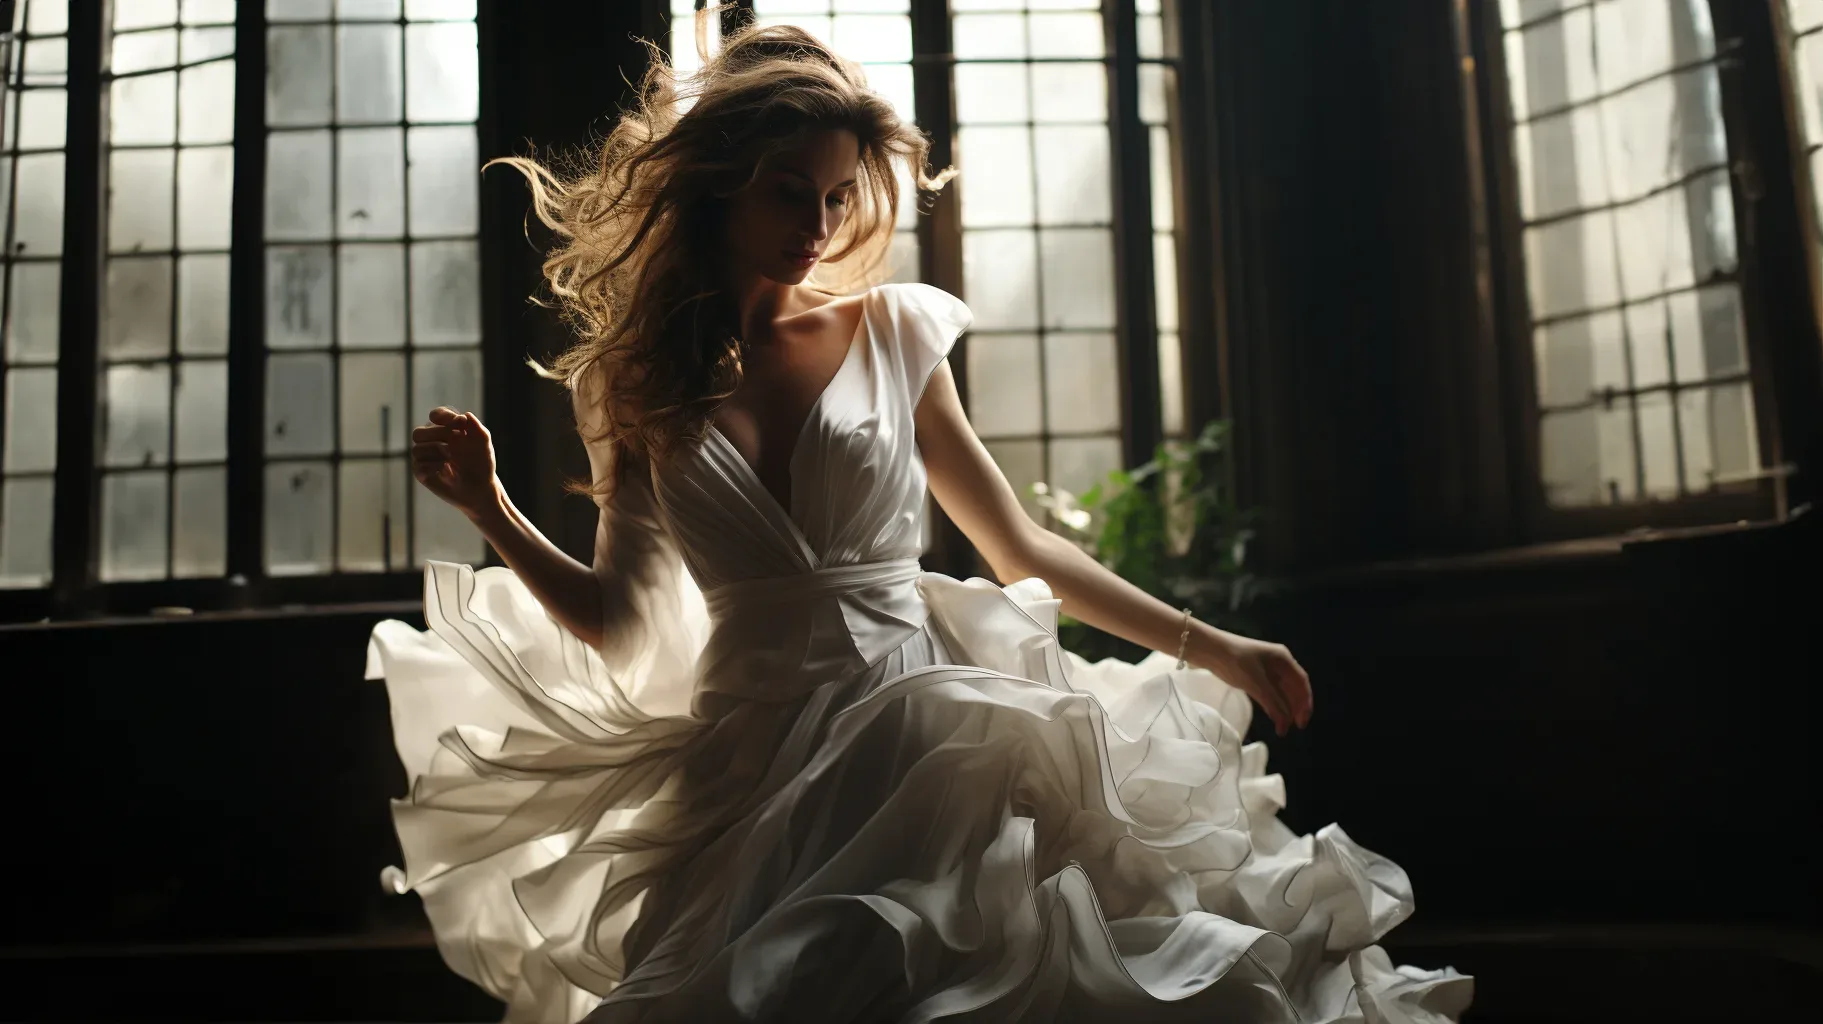 A woman in a white dress dancing in a dark room. Budget for your wedding day Photography